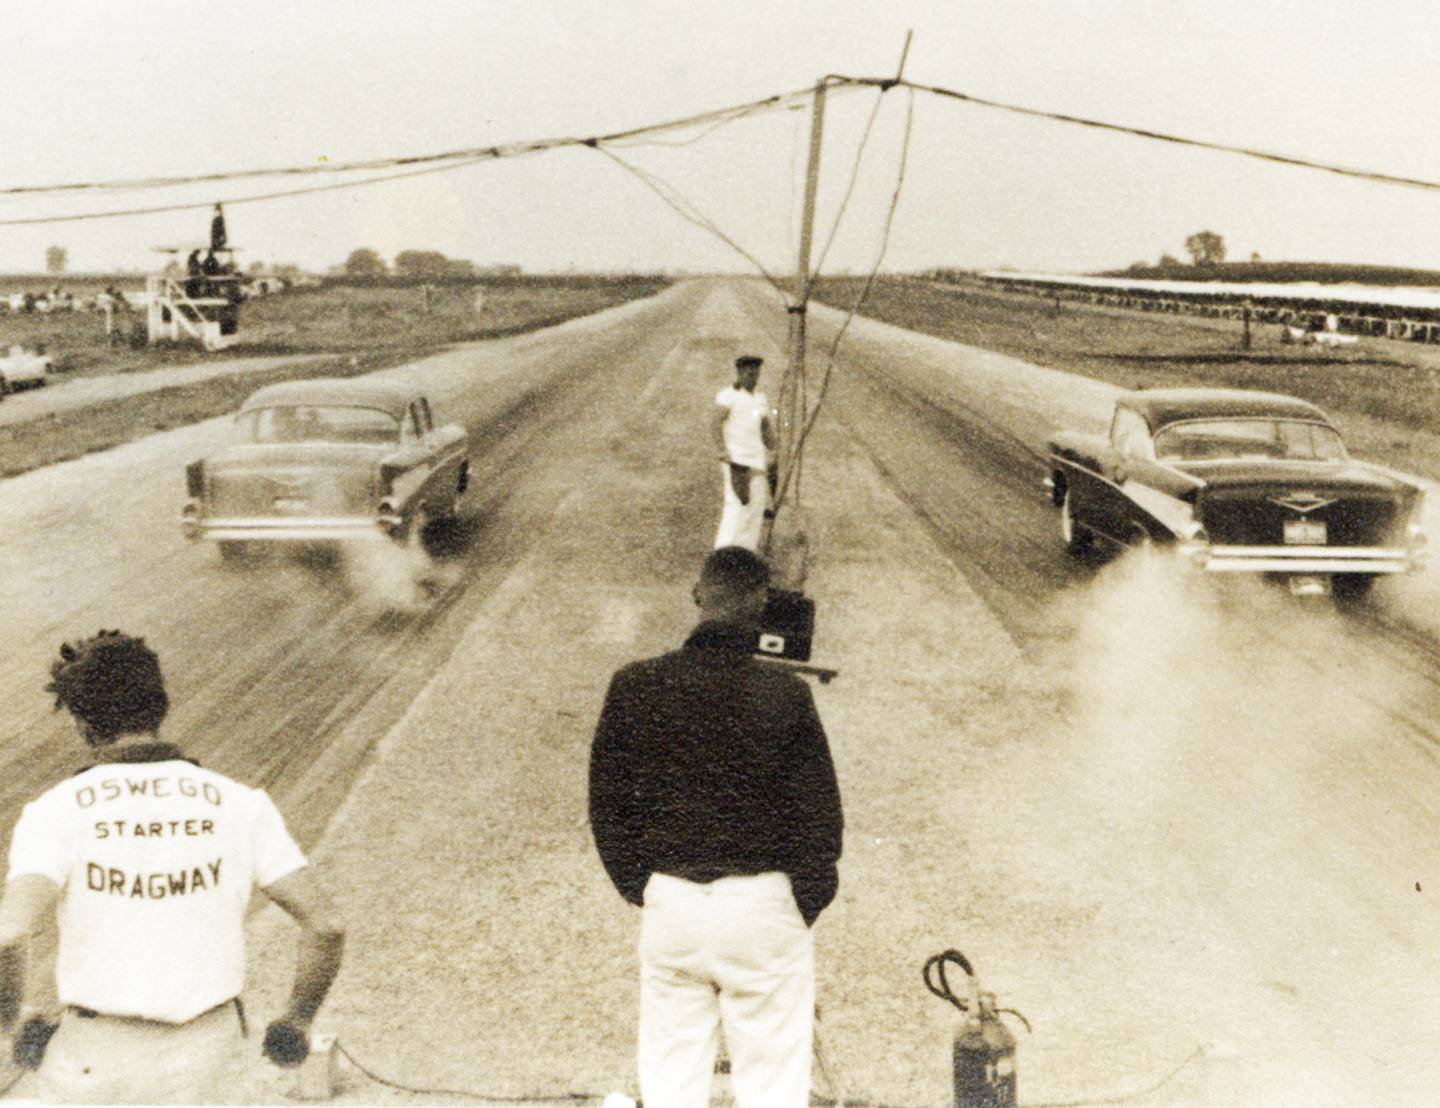 On a Sunday in 1957, just a couple years after the Oswego Drag Raceway opened, two new ’57 Chevys burn off the line during a race at "The Strip." Join other Oswego Drag Raceway fans on Thursday, Aug. 11, at 6:30 p.m. at the Oswego Brewing Company, 61 Main St., Oswego, for “History Happy Hour – Oswego Drag Raceway,” an hour of discussion and reminiscences about the raceway that drew thousands of fans to Oswego weekly.